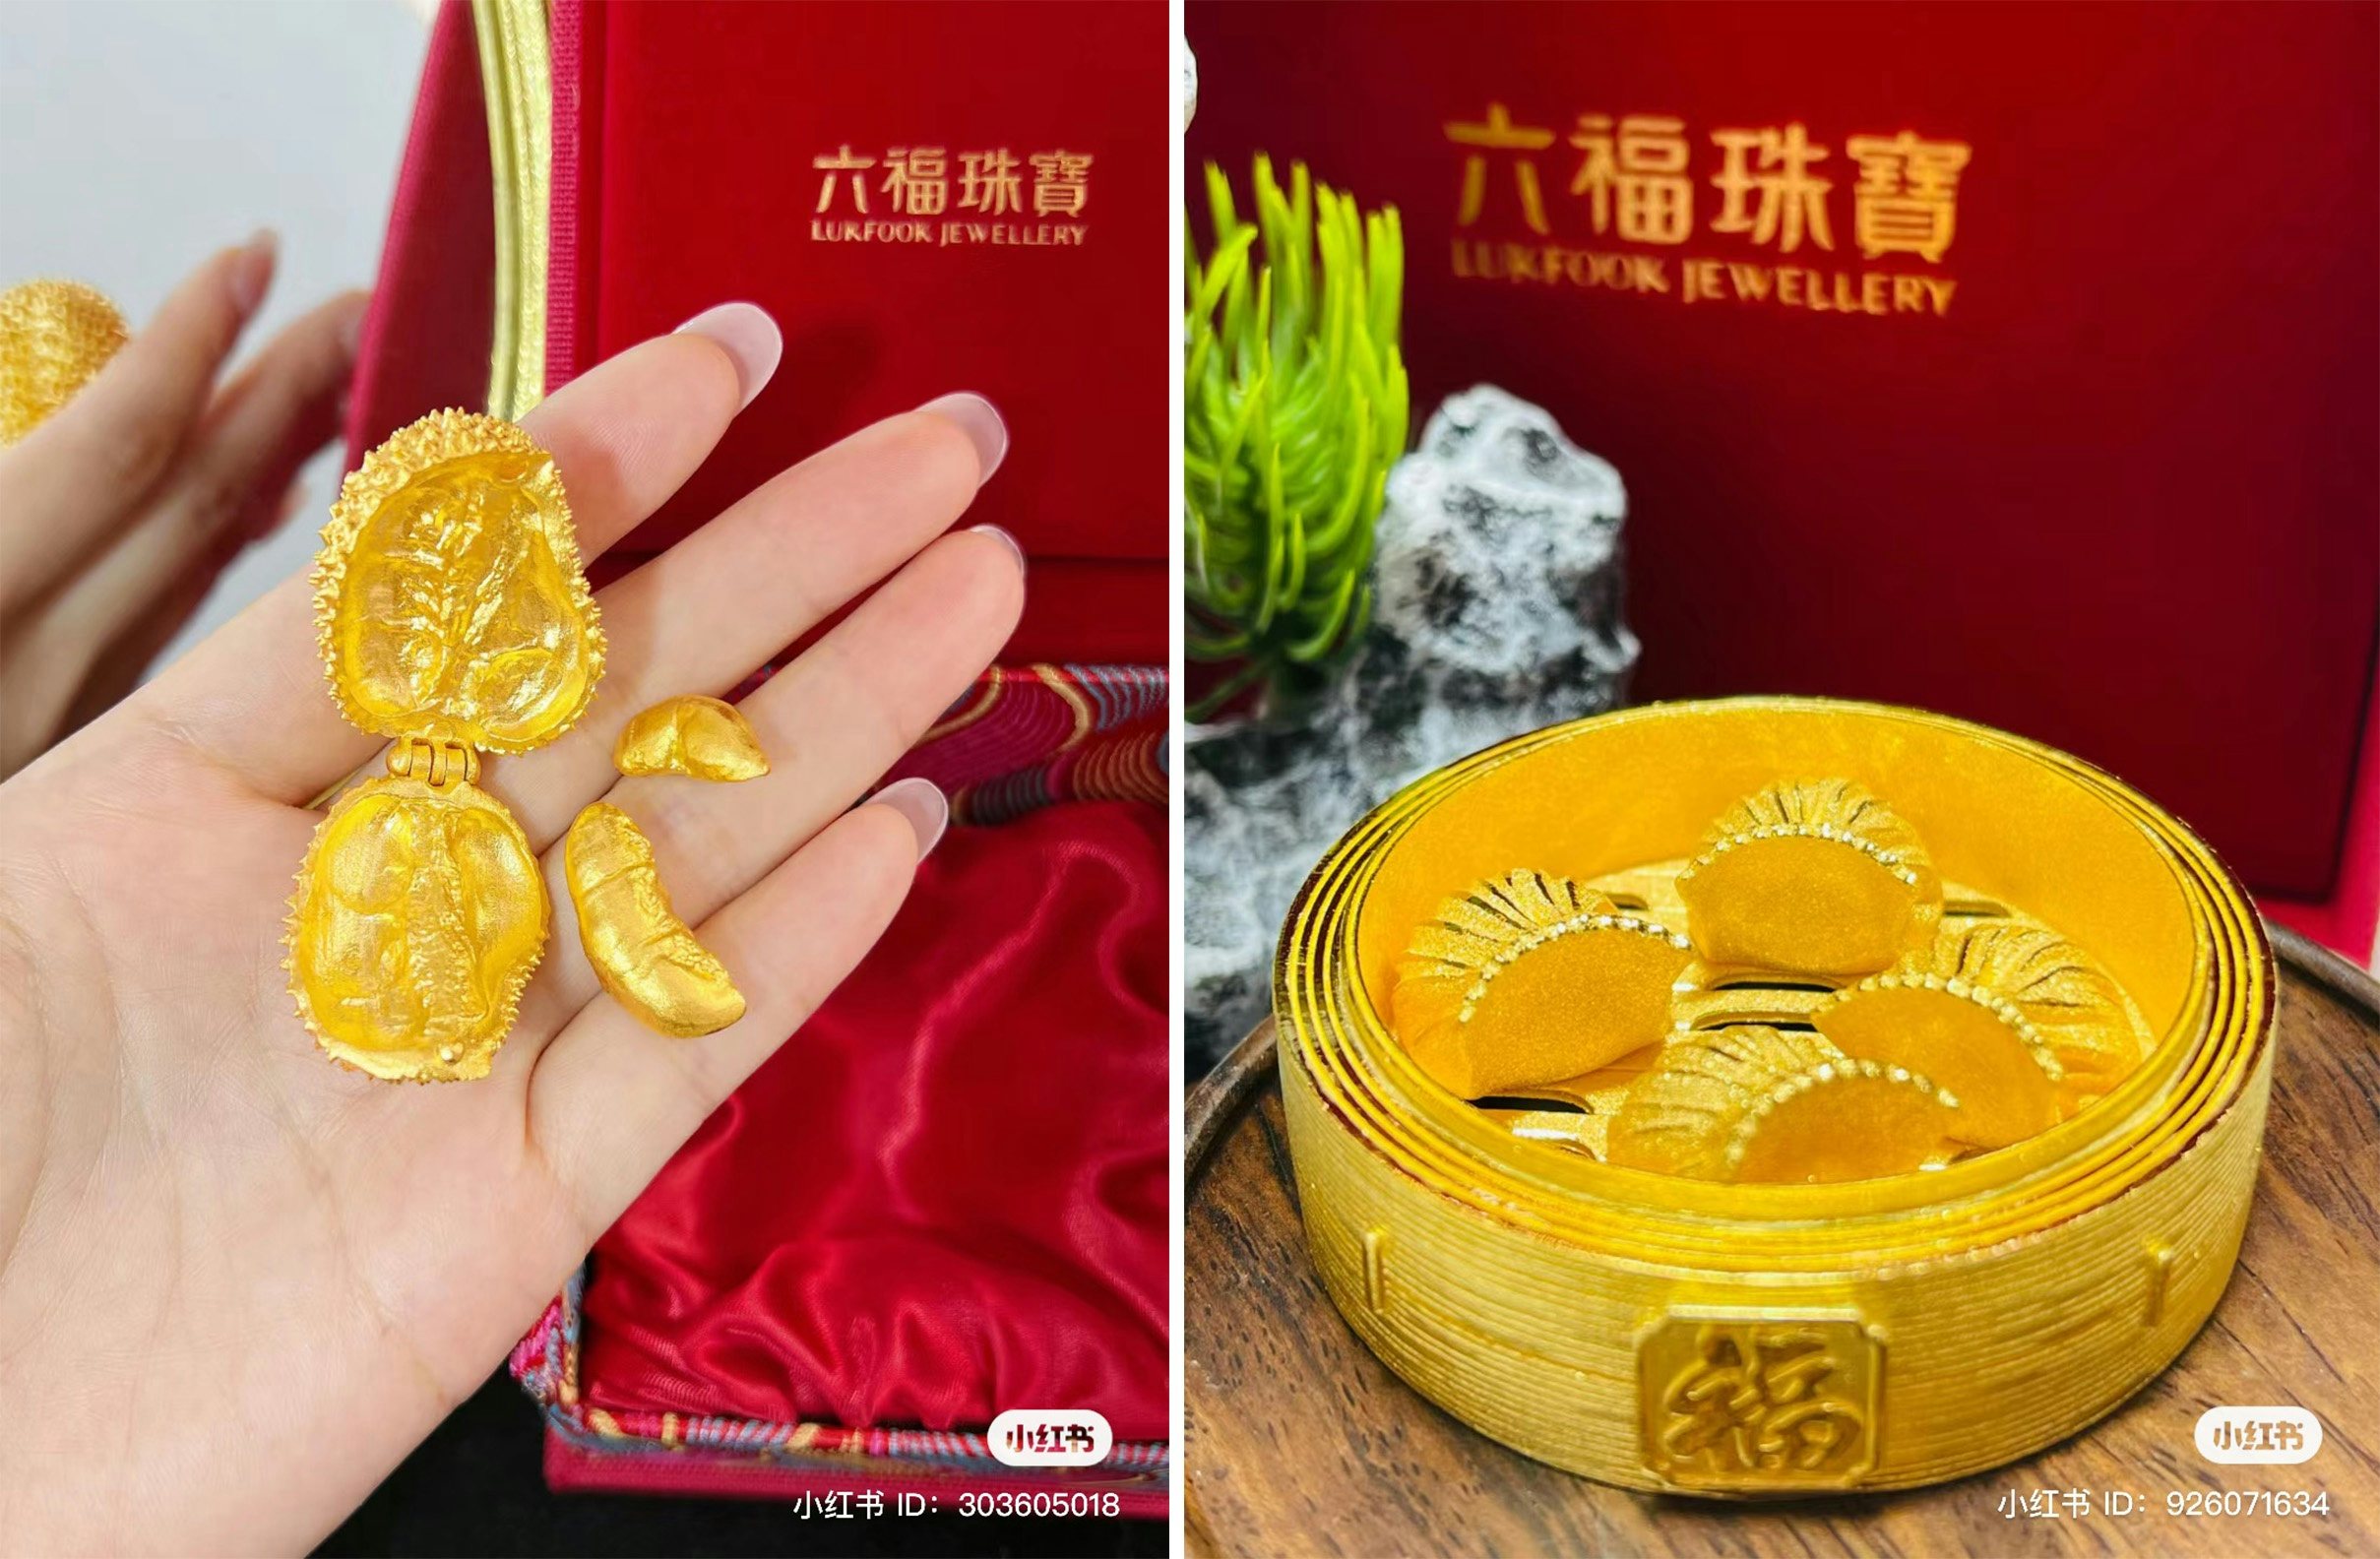 Hong Kong jewelry brand Lukfook is gaining attention online for its quirky food-shaped gold ornaments. Photo: Lukfook